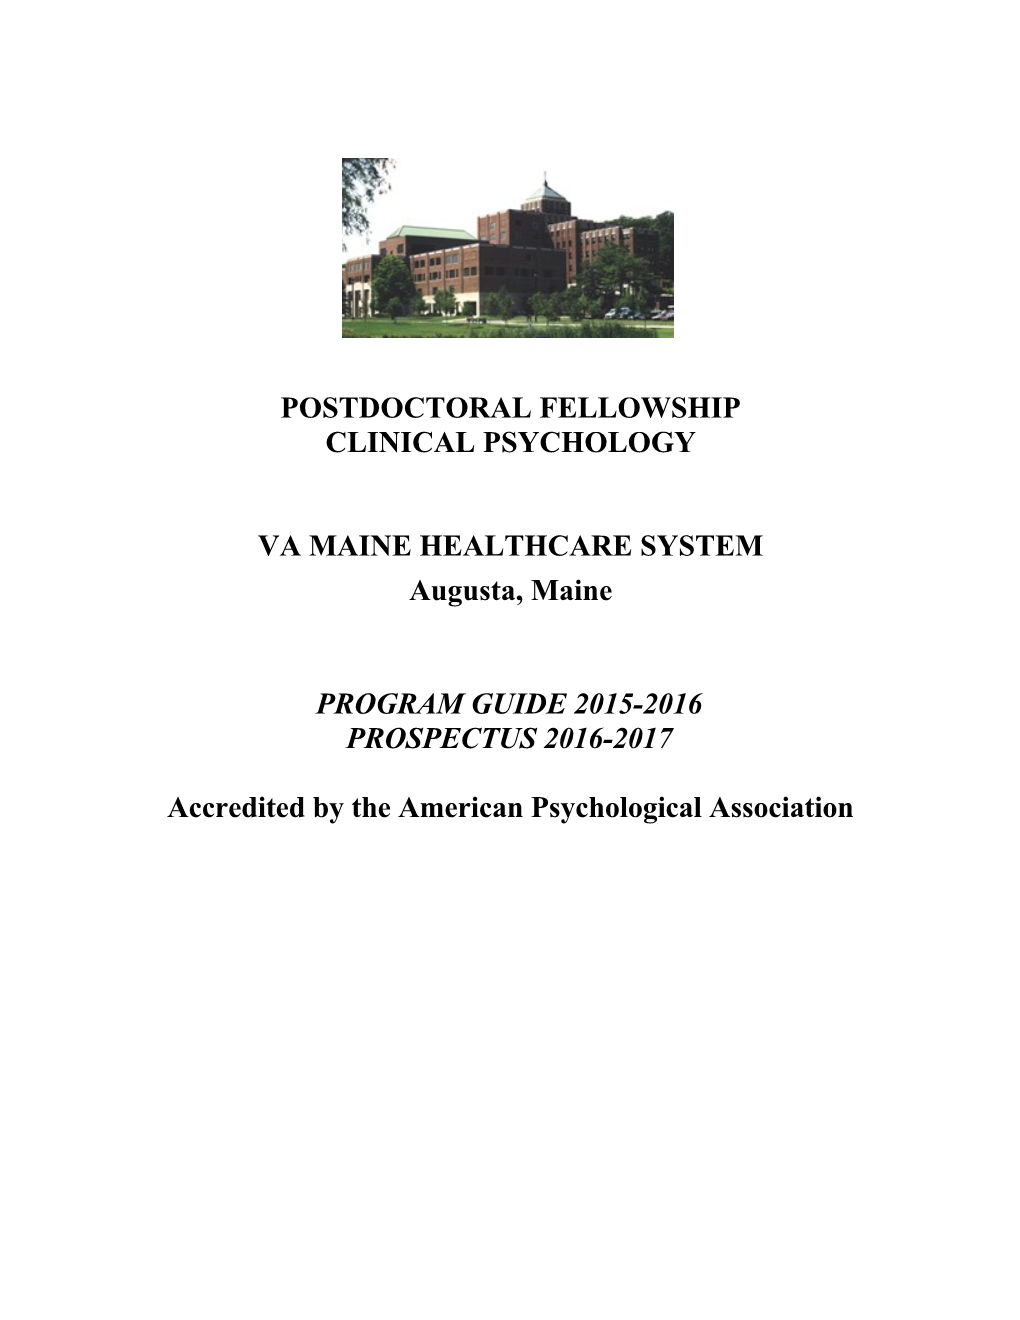 Togus Postdoctoral Fellowships In Clinical Psychology 2006-2007 Brochure